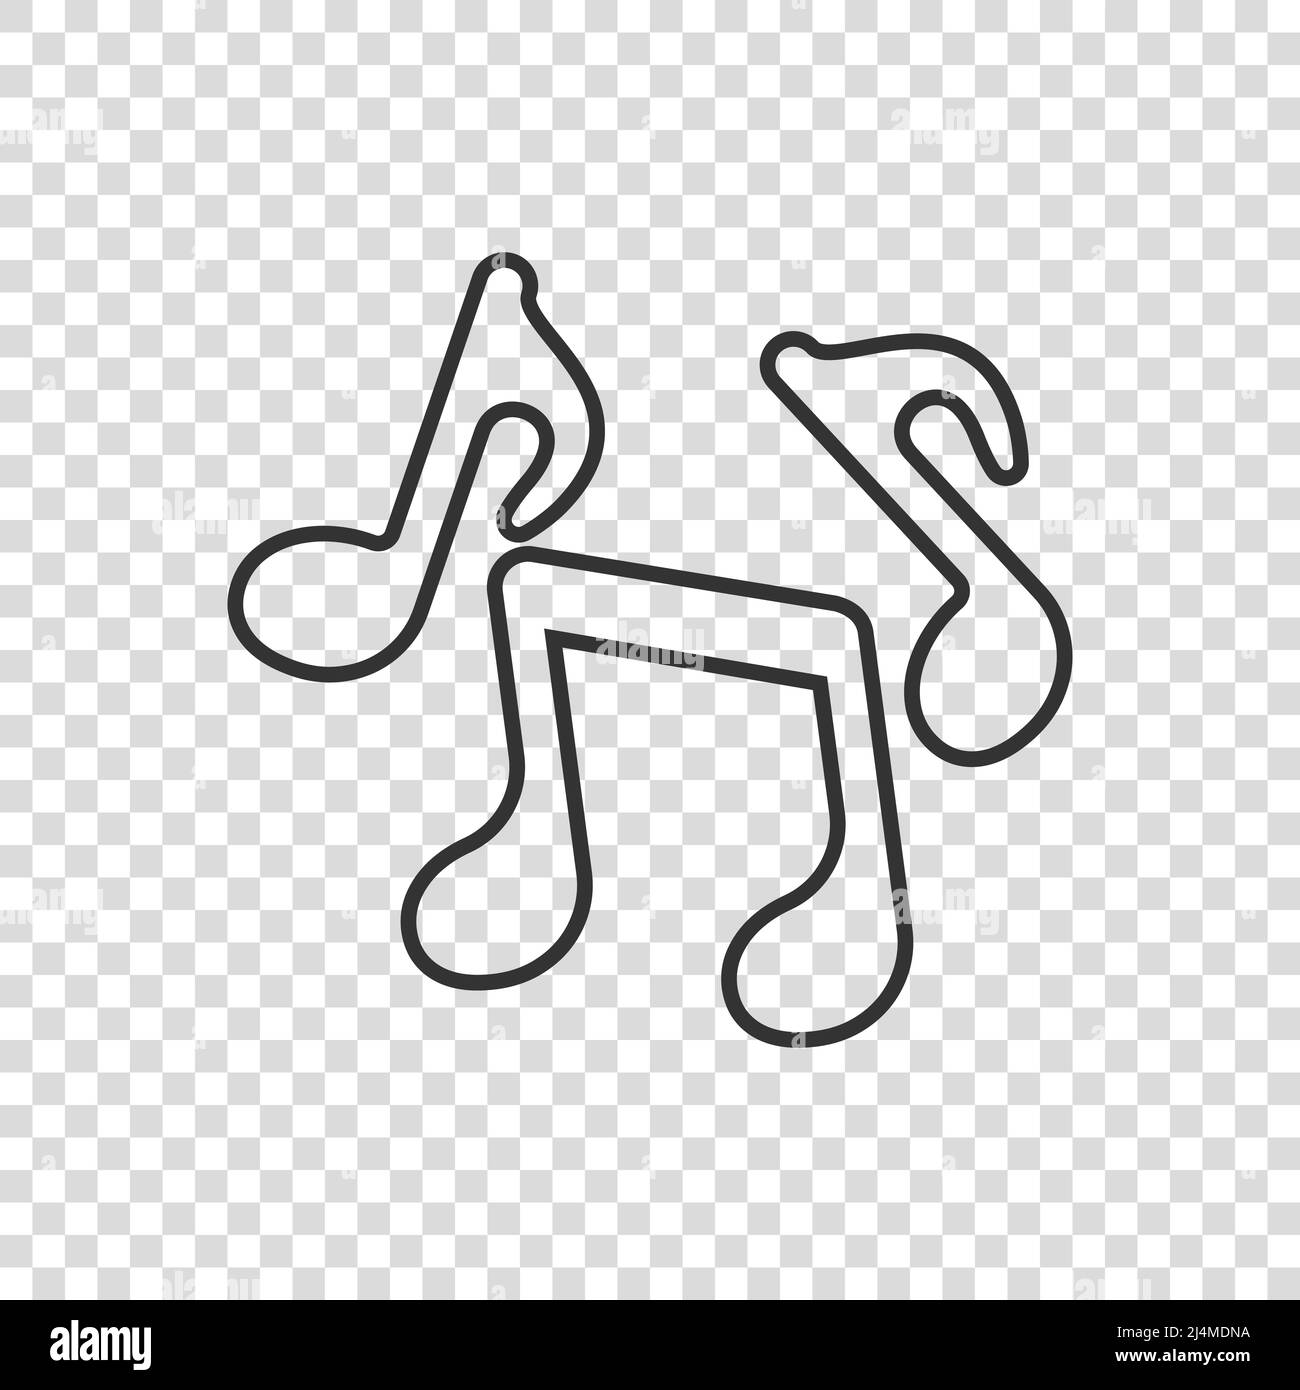 Music note icon in flat style. Song vector illustration on white isolated background. Musician sign business concept. Stock Vector